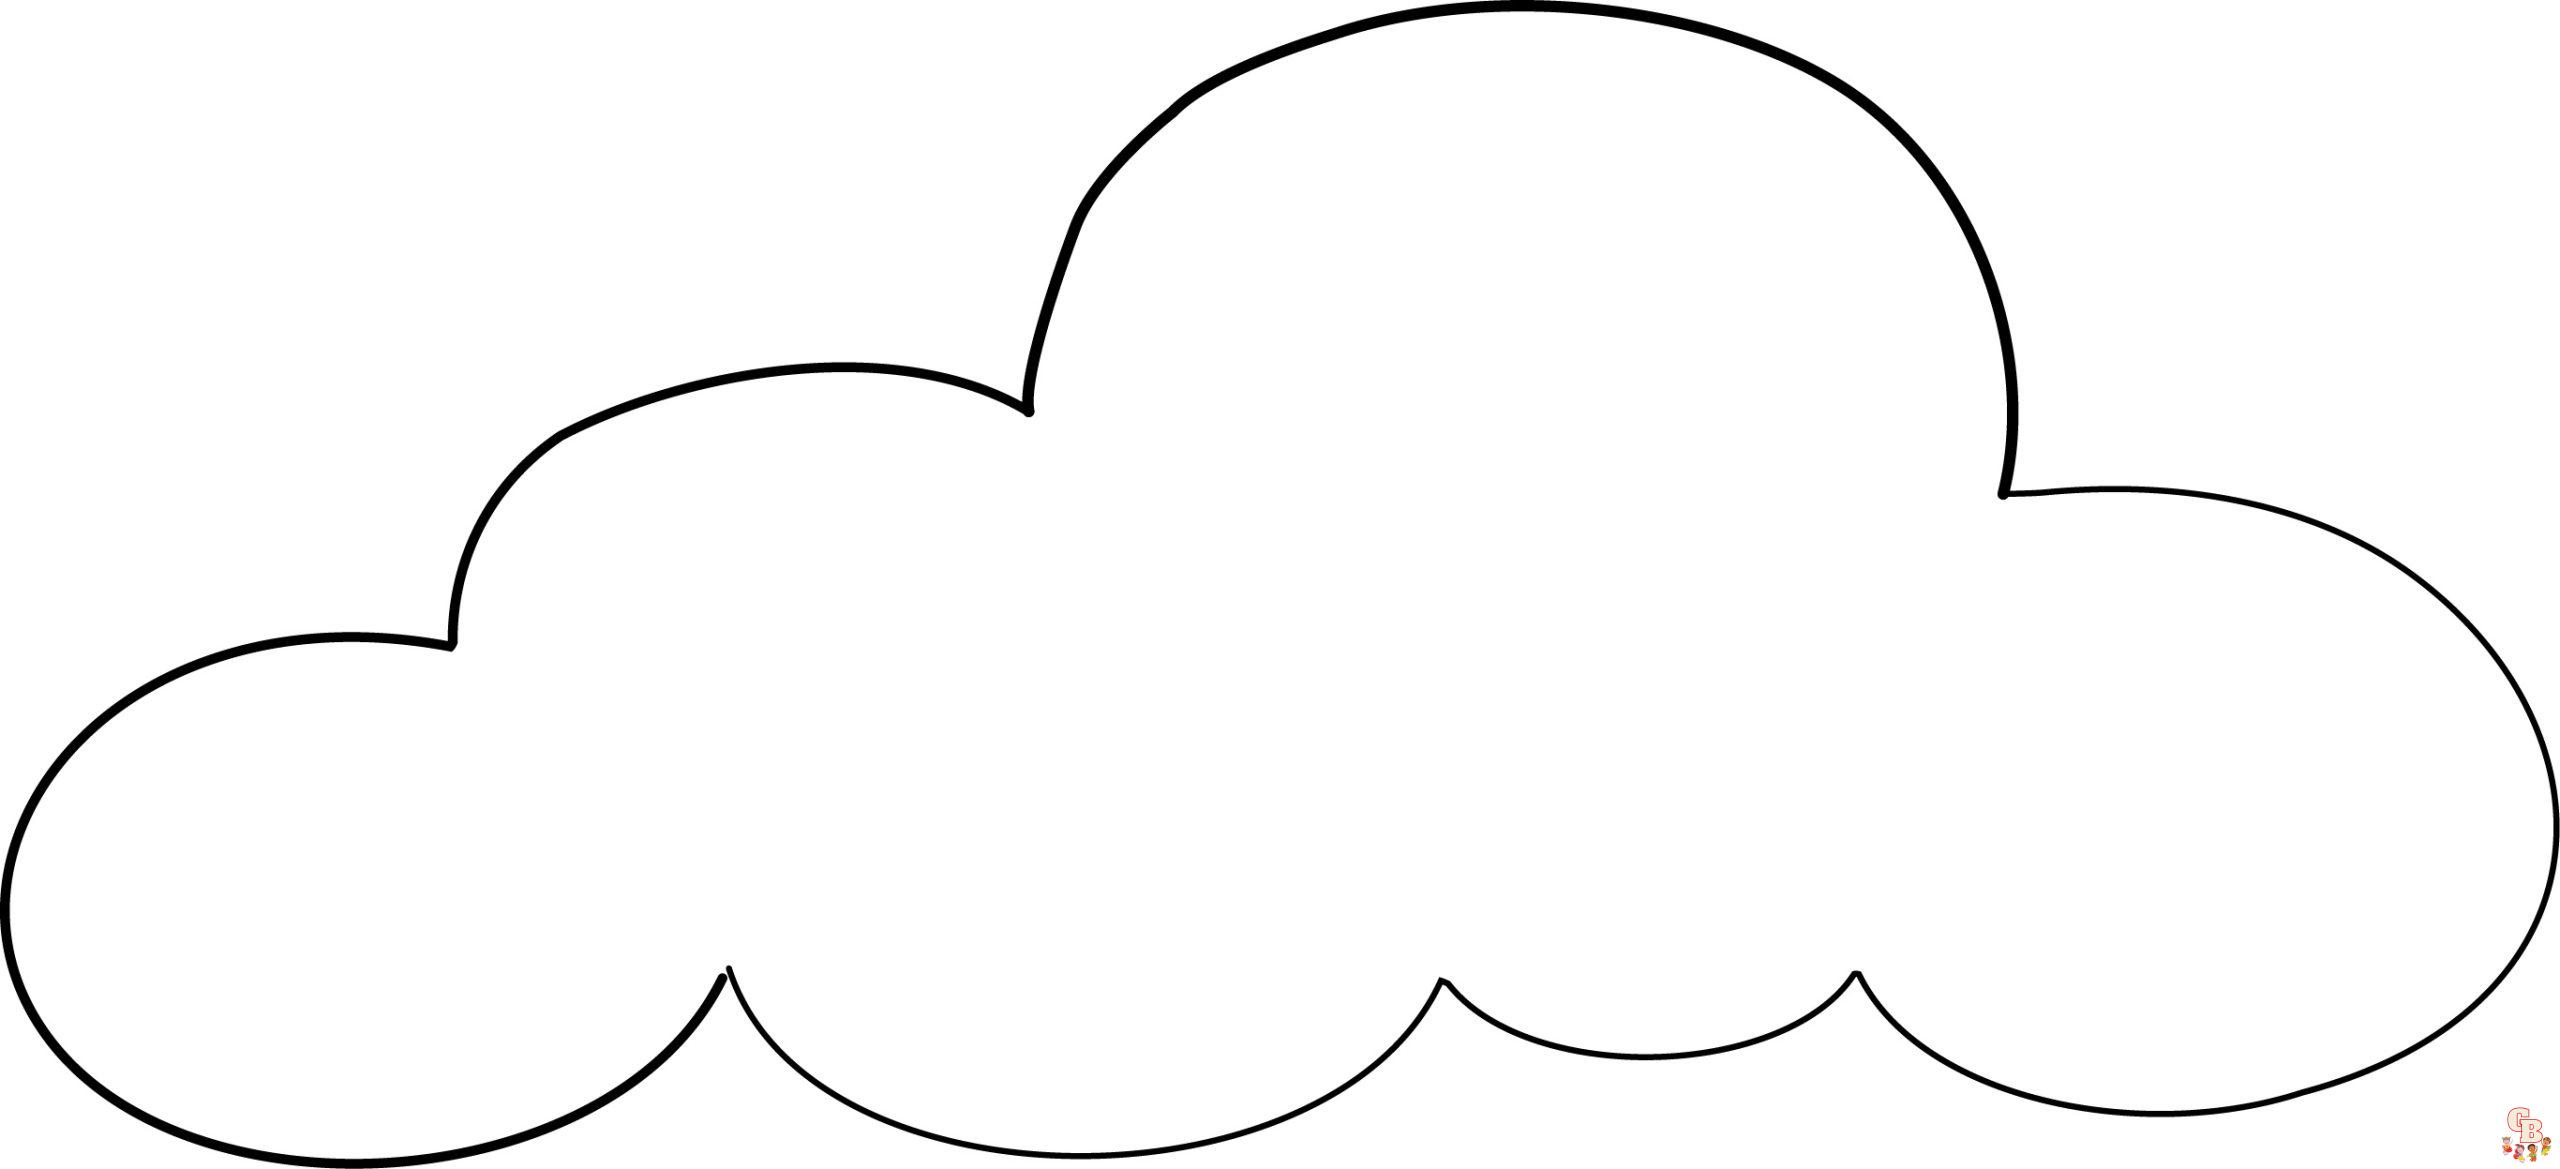 Cloud coloring pages printable and free coloring pages of clouds